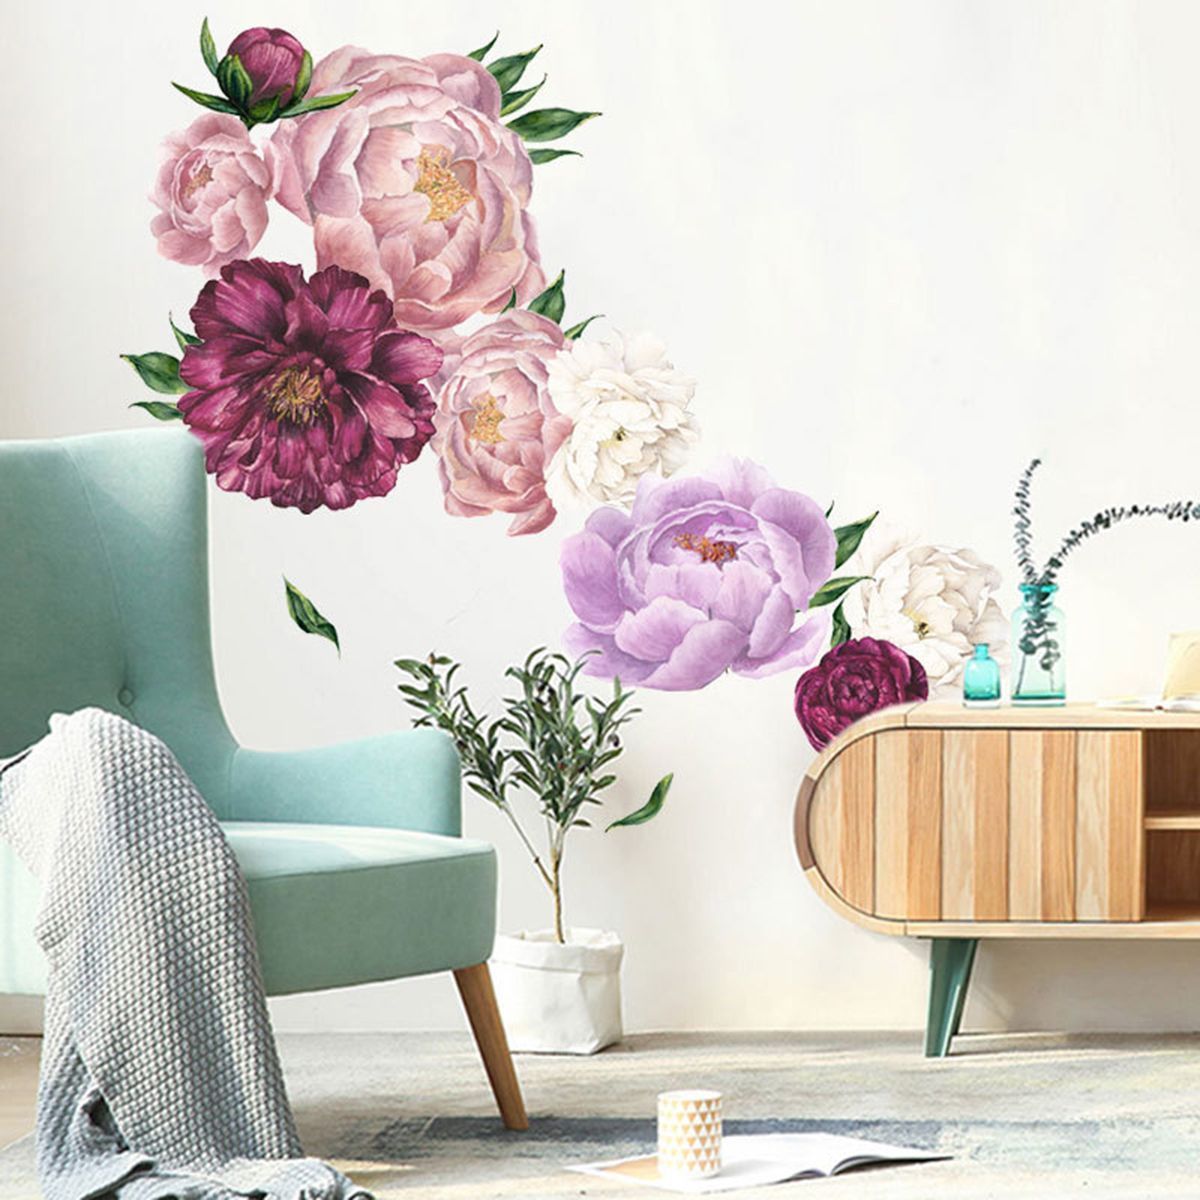 Pink-Peony-Rose-Flowers-Wall-Sticker-Vintage-Mural-Room-Home-Art-Flora-Decorations-1576064